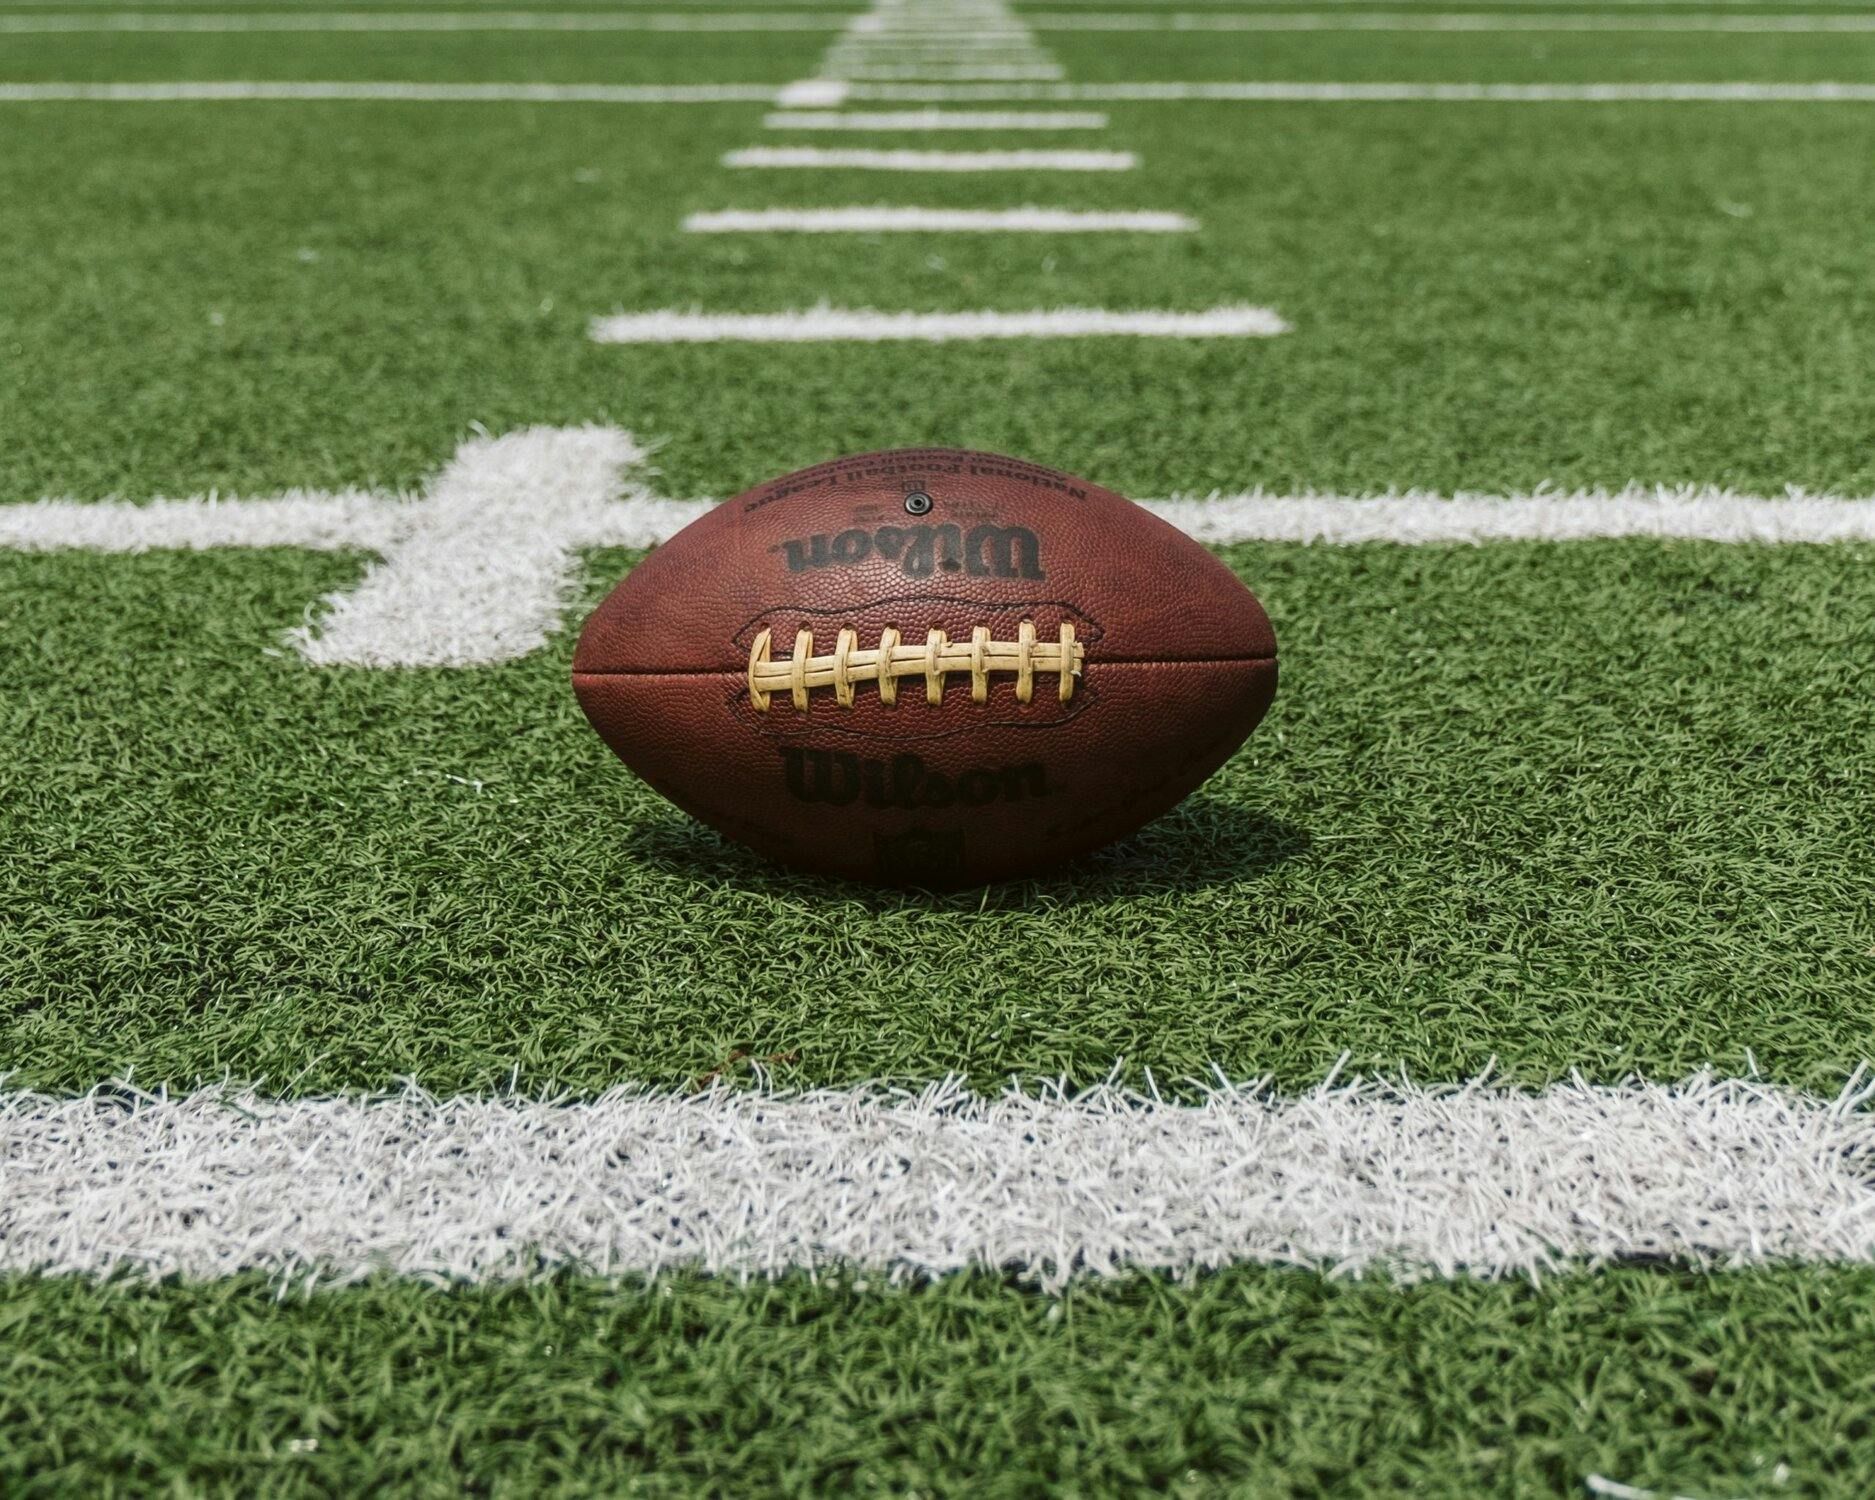 Restaurant Marketing Ideas: How to Maximize Business Throughout the NFL Season